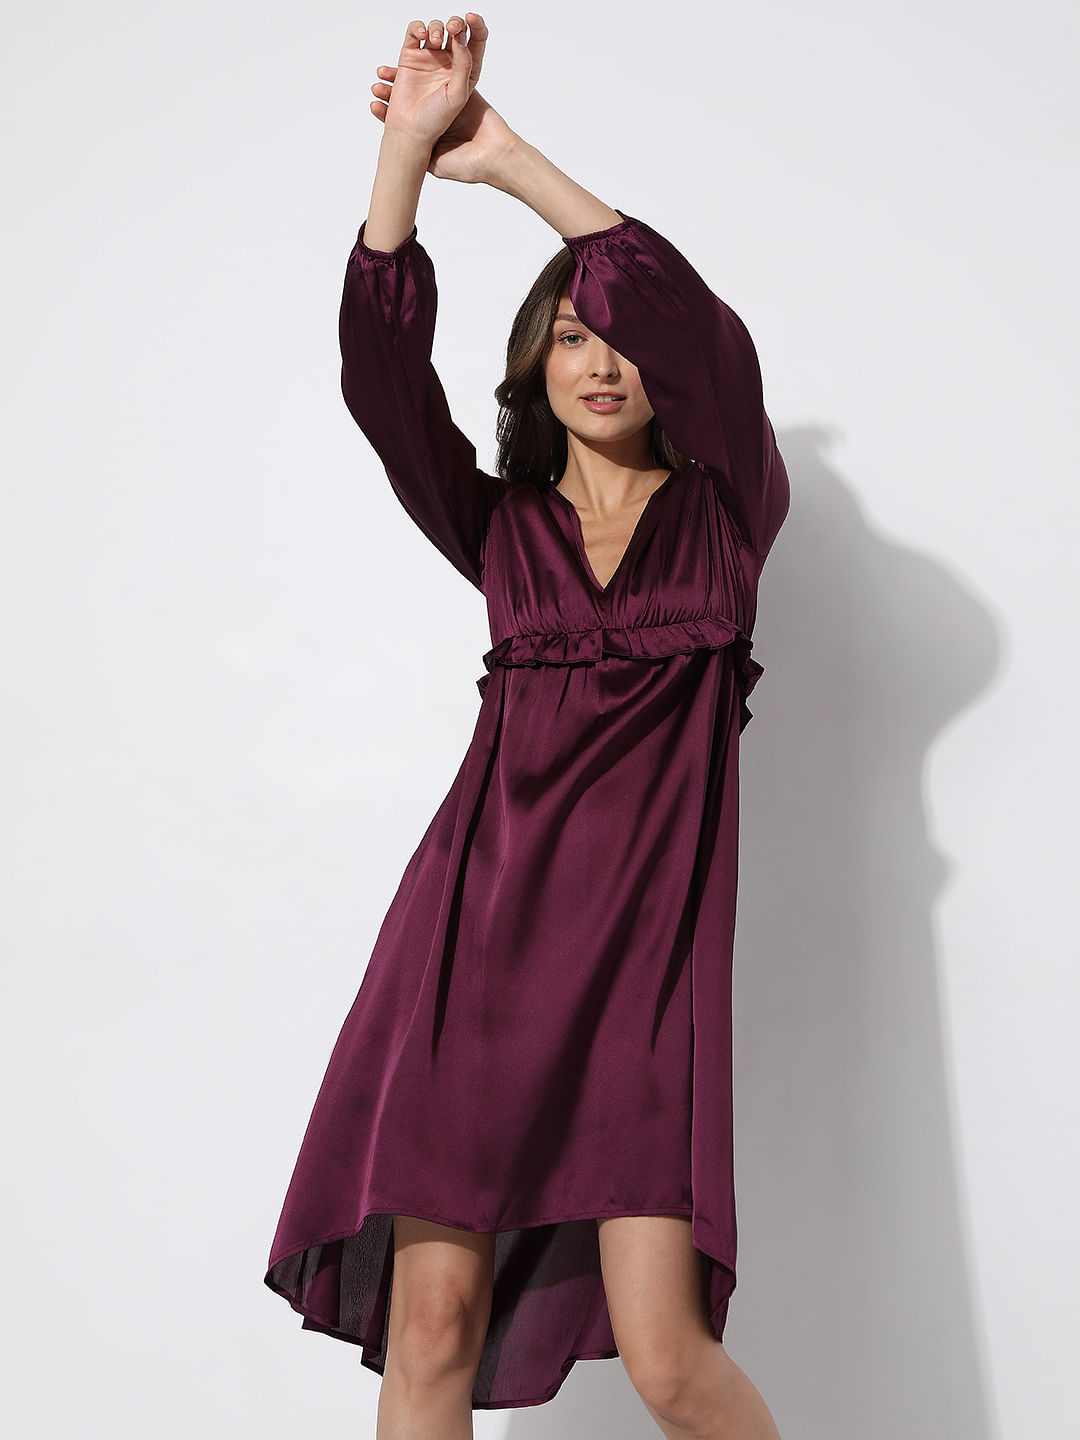 LEILA GOLD COLOR GLOSSY SATIN FABRIC KNEE LENGTH DRESS WITH LONG SLEEVES  AND PLEAT DETAILING AT